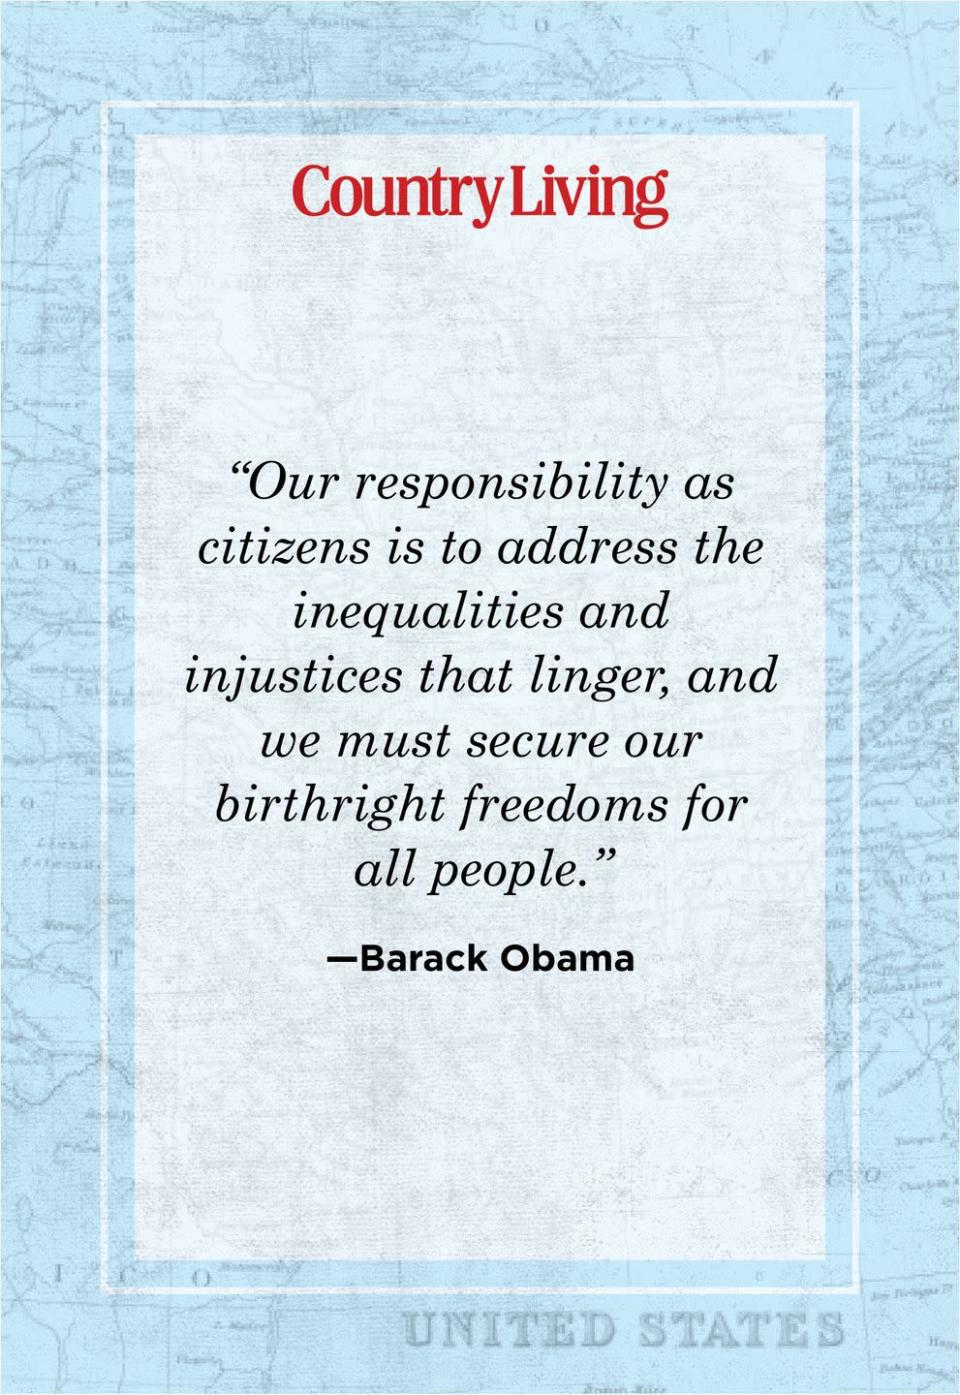 <p>"Our responsibility as citizens is to address the inequalities and injustices that linger, and we must secure our birthright freedoms for all people."</p>